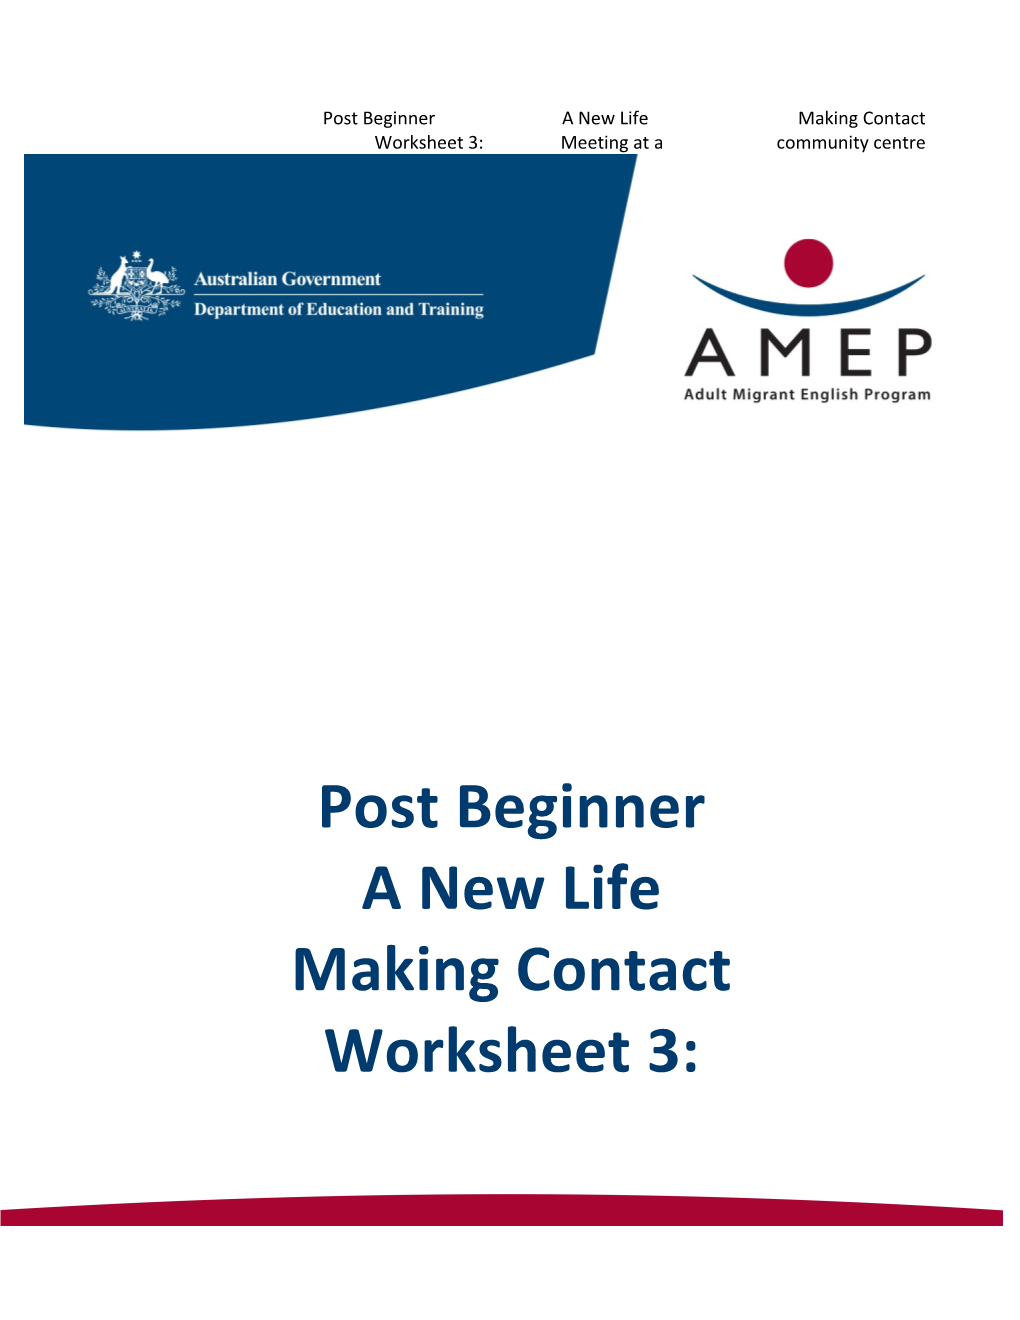 Post Beginner a New Life Making Contact Worksheet 3: Meeting at a Community Centre